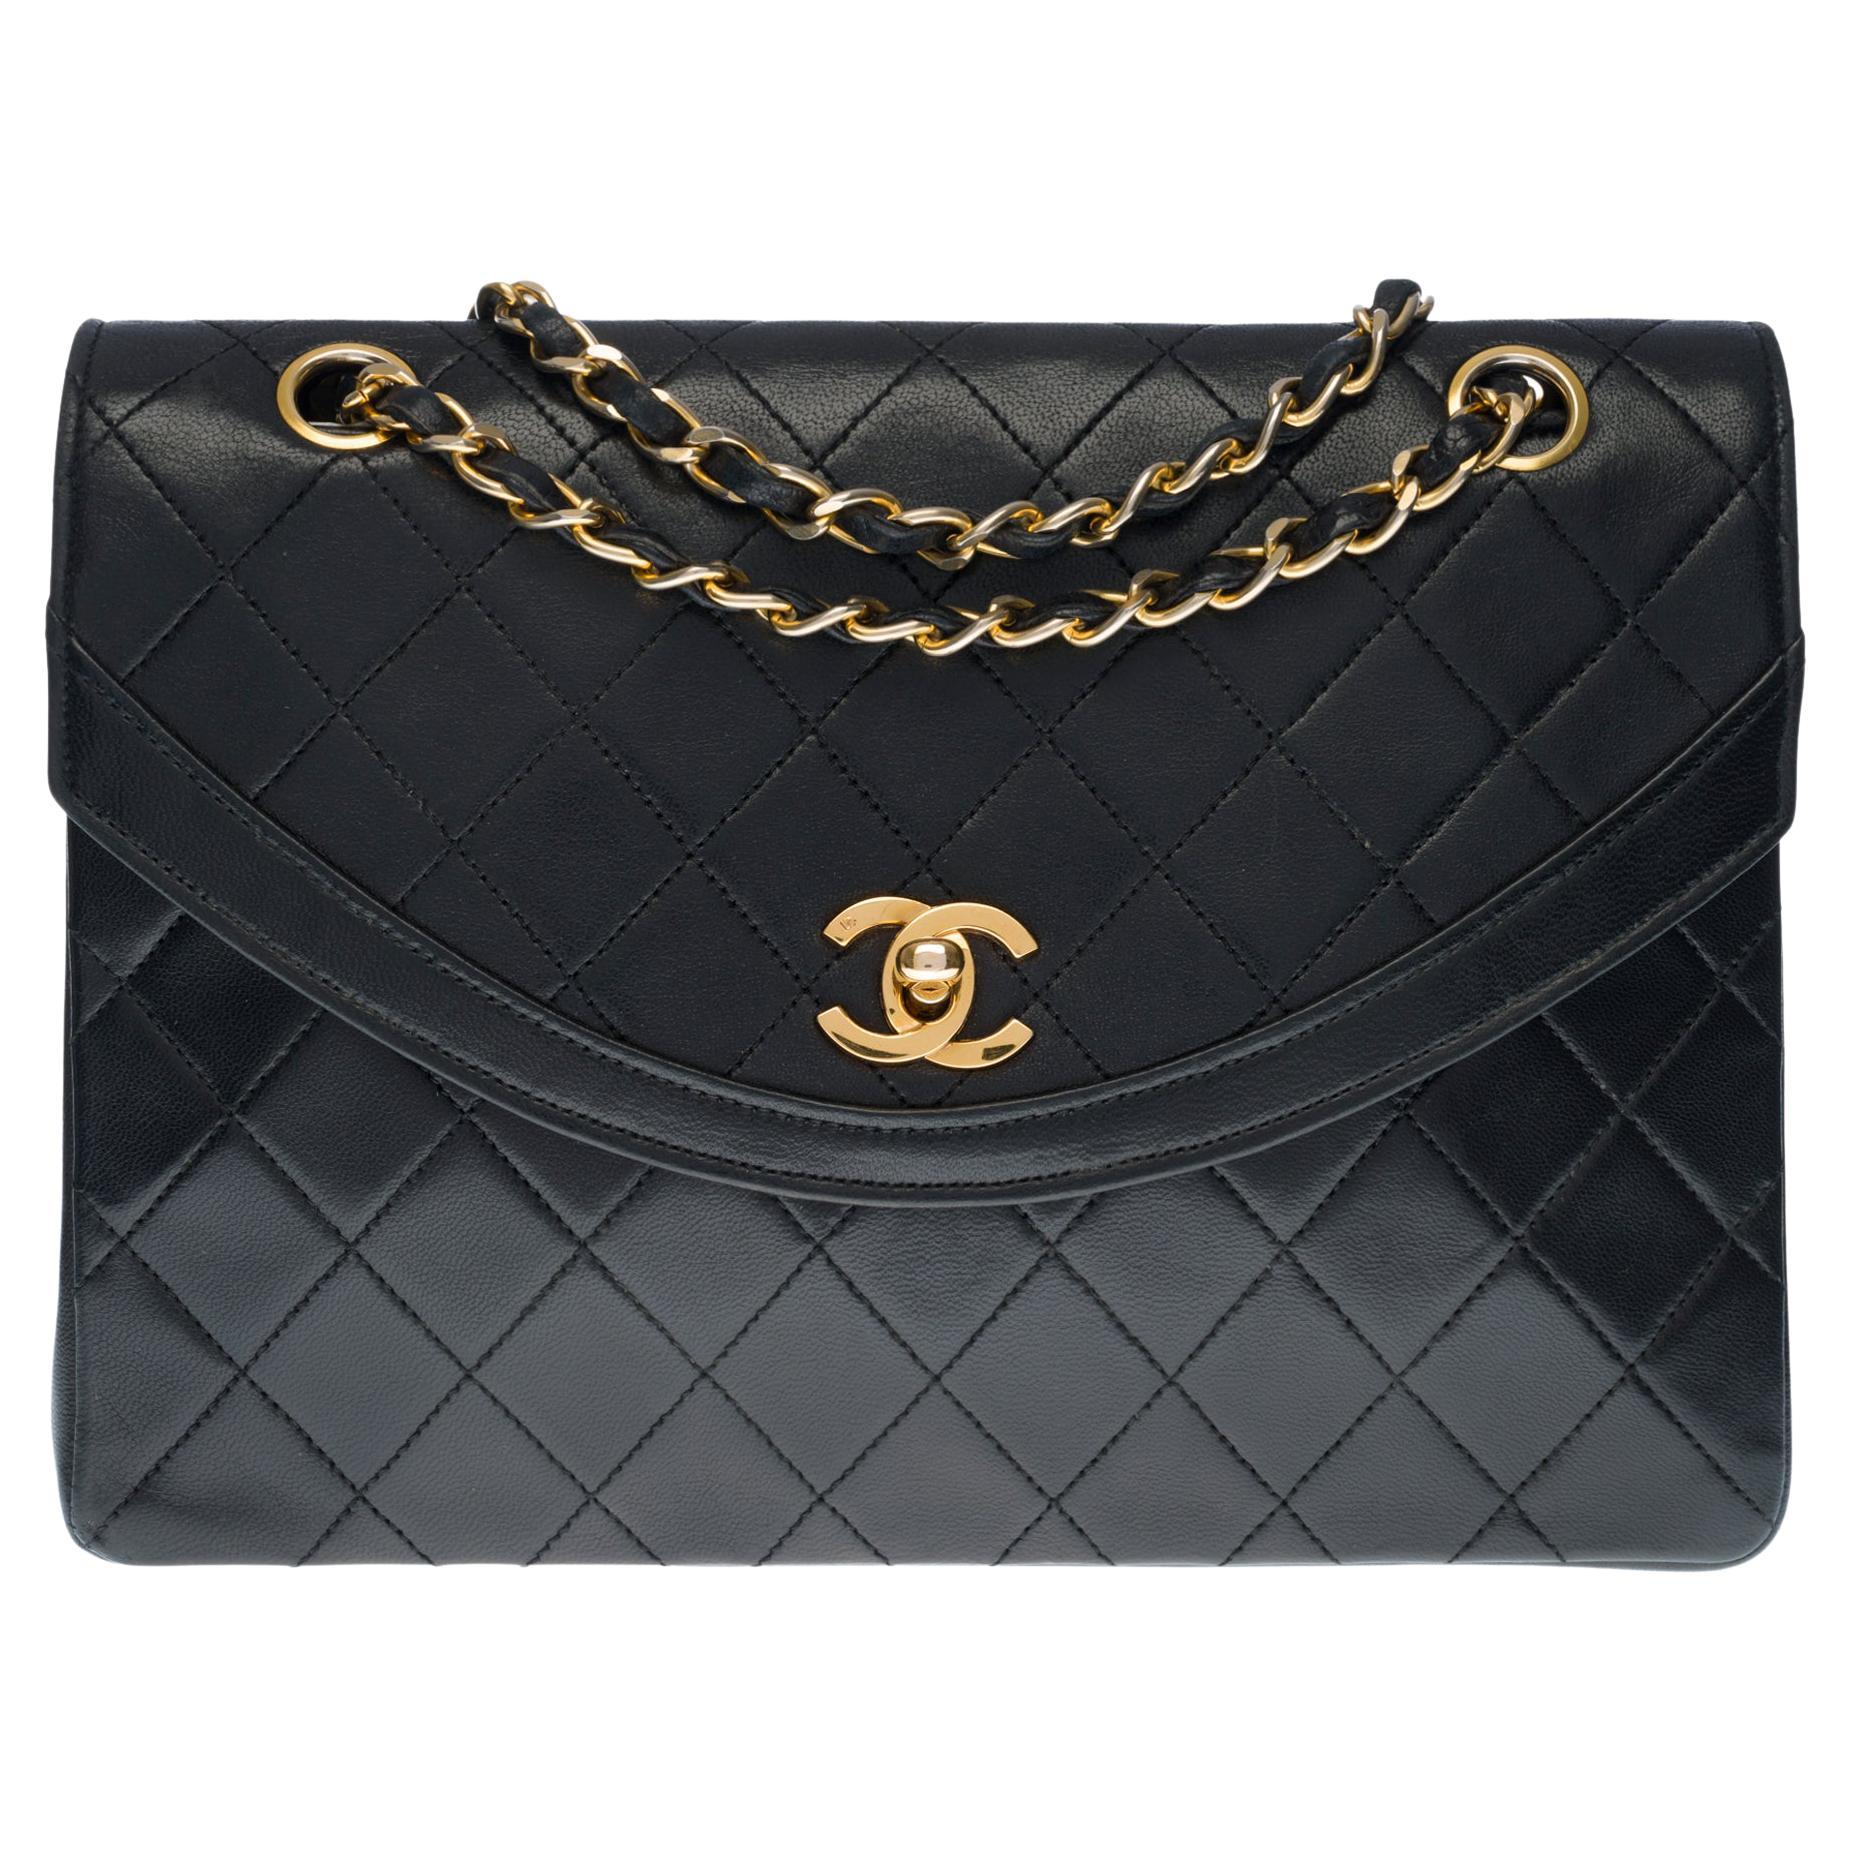 Chanel Classic Flap shoulder bag in black quilted lambskin and gold hardware